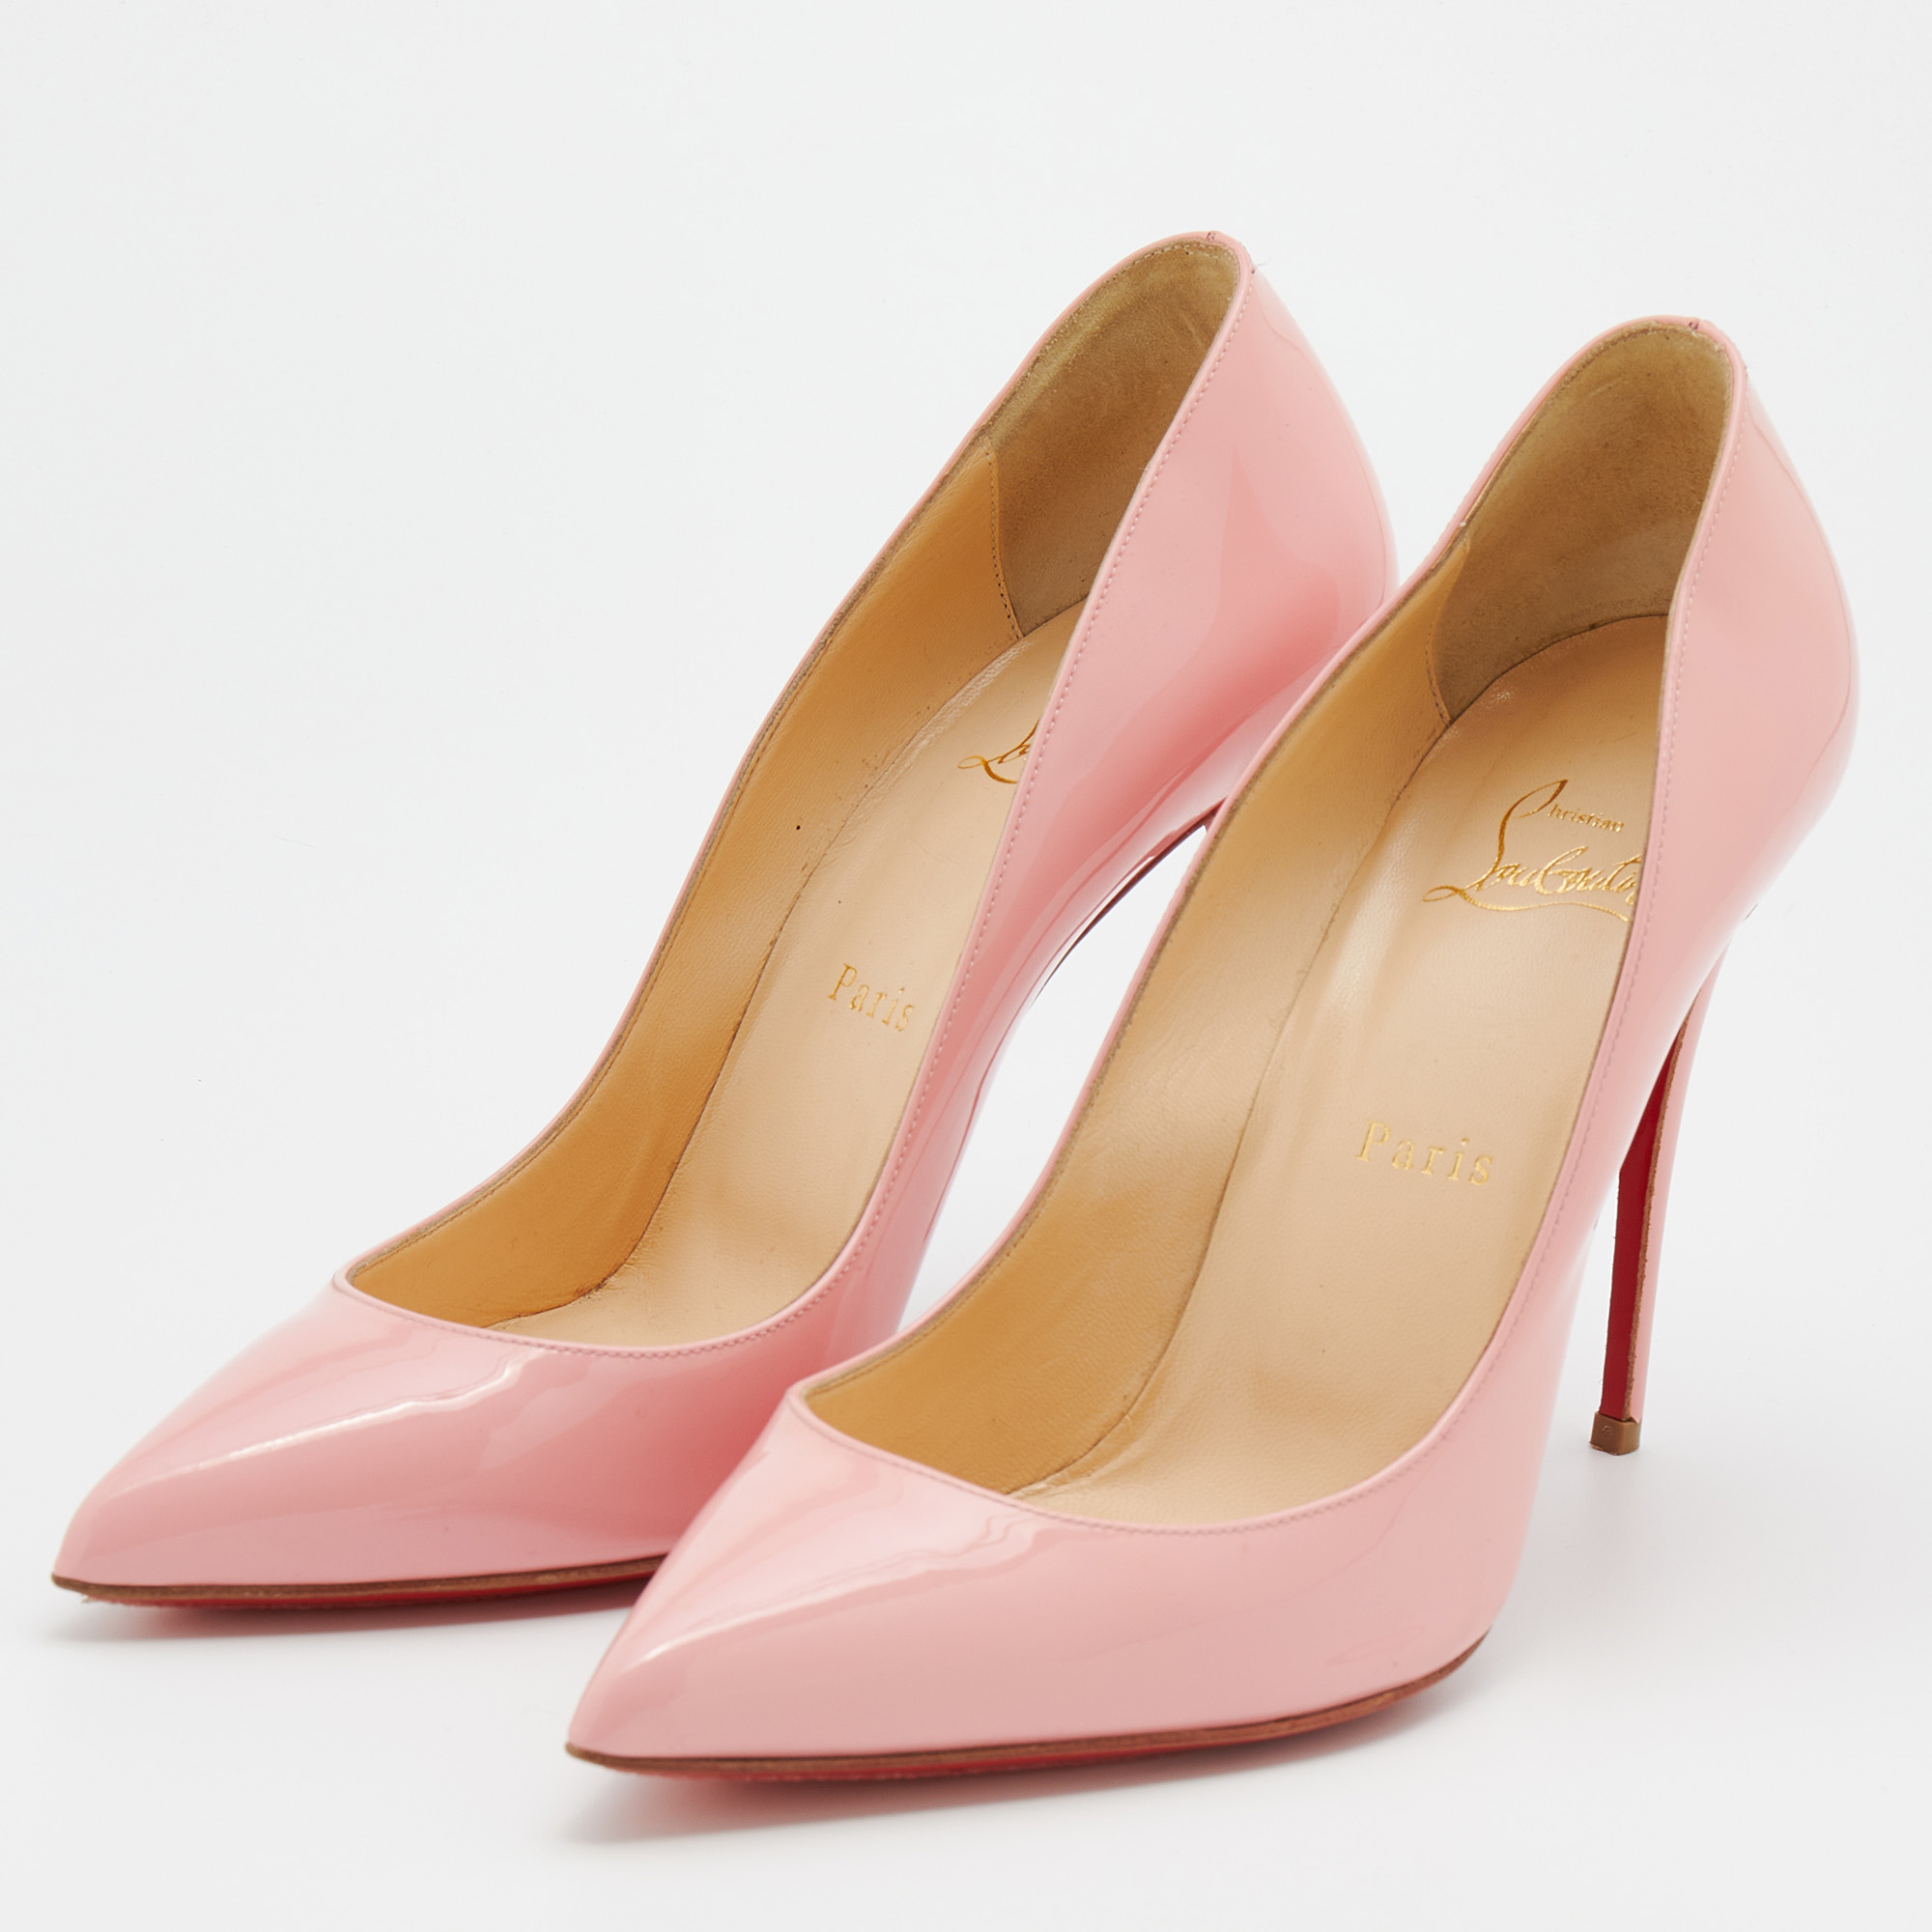 

Christian Louboutin Pink Patent Leather Pigalle Follies Pumps Size